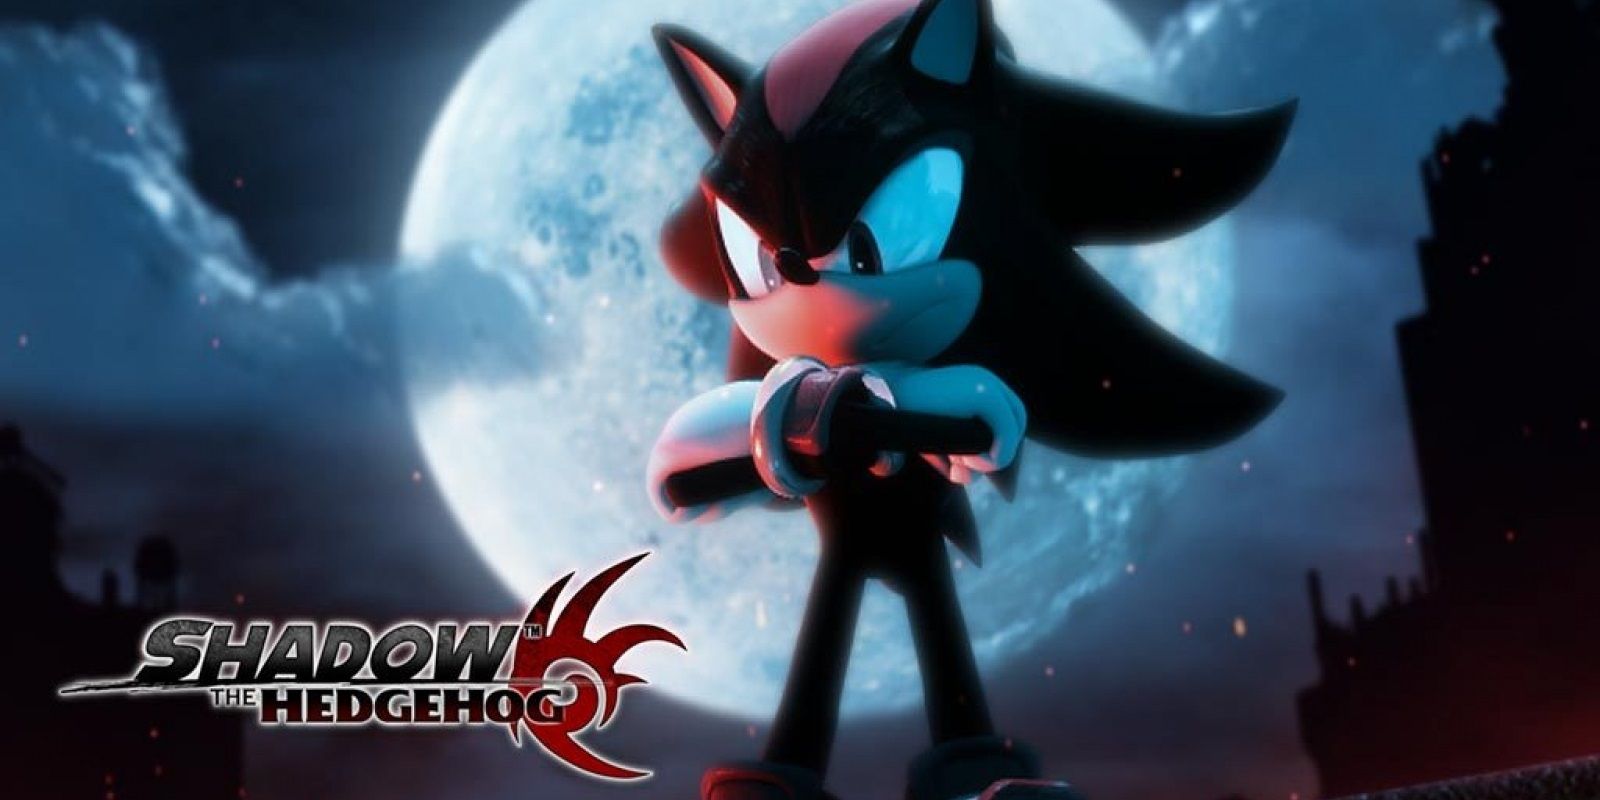 Shadow the Hedgehog video game ad